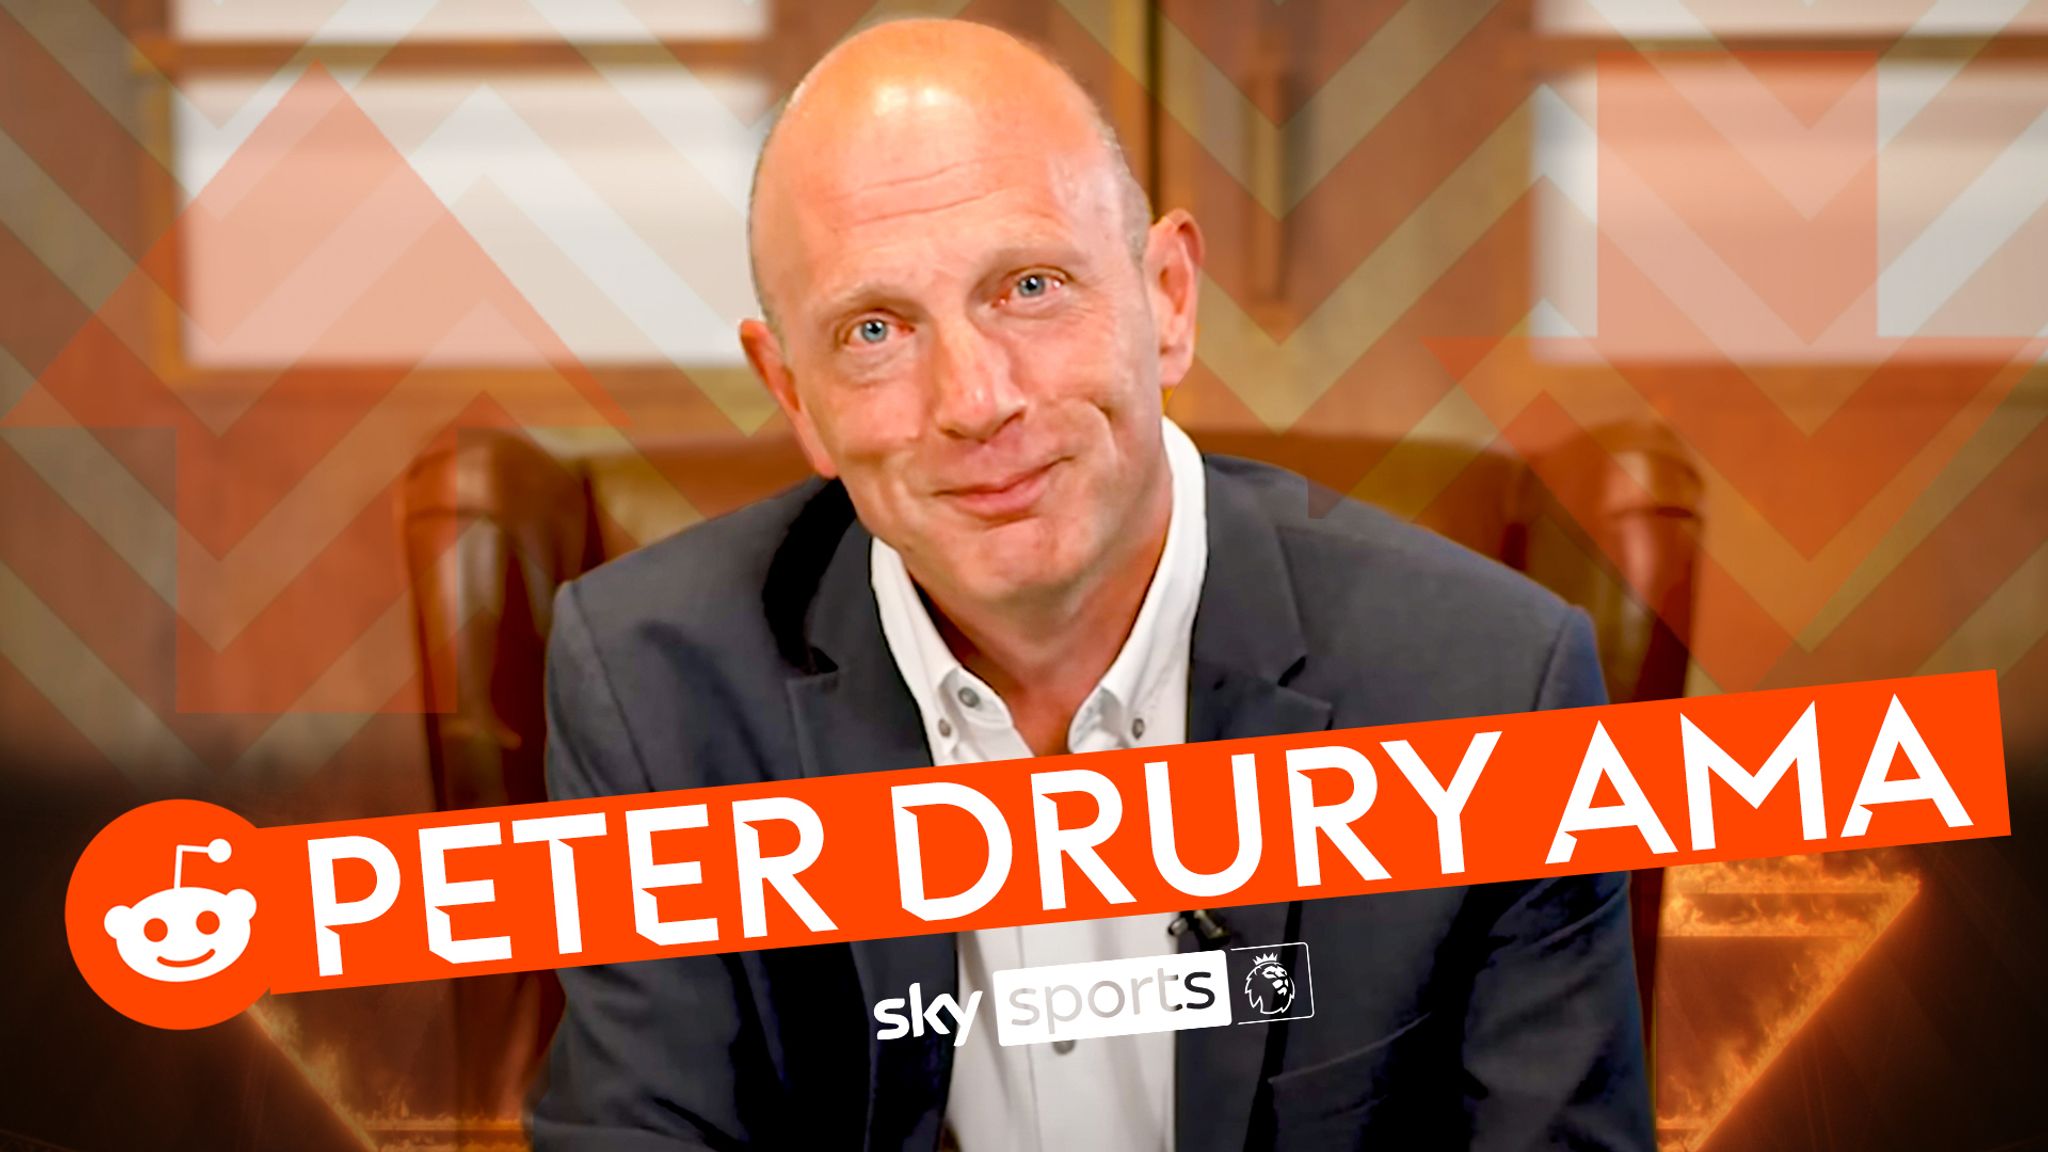 Reddit Ask Me Anything with Peter Drury Video Watch TV Show Sky Sports